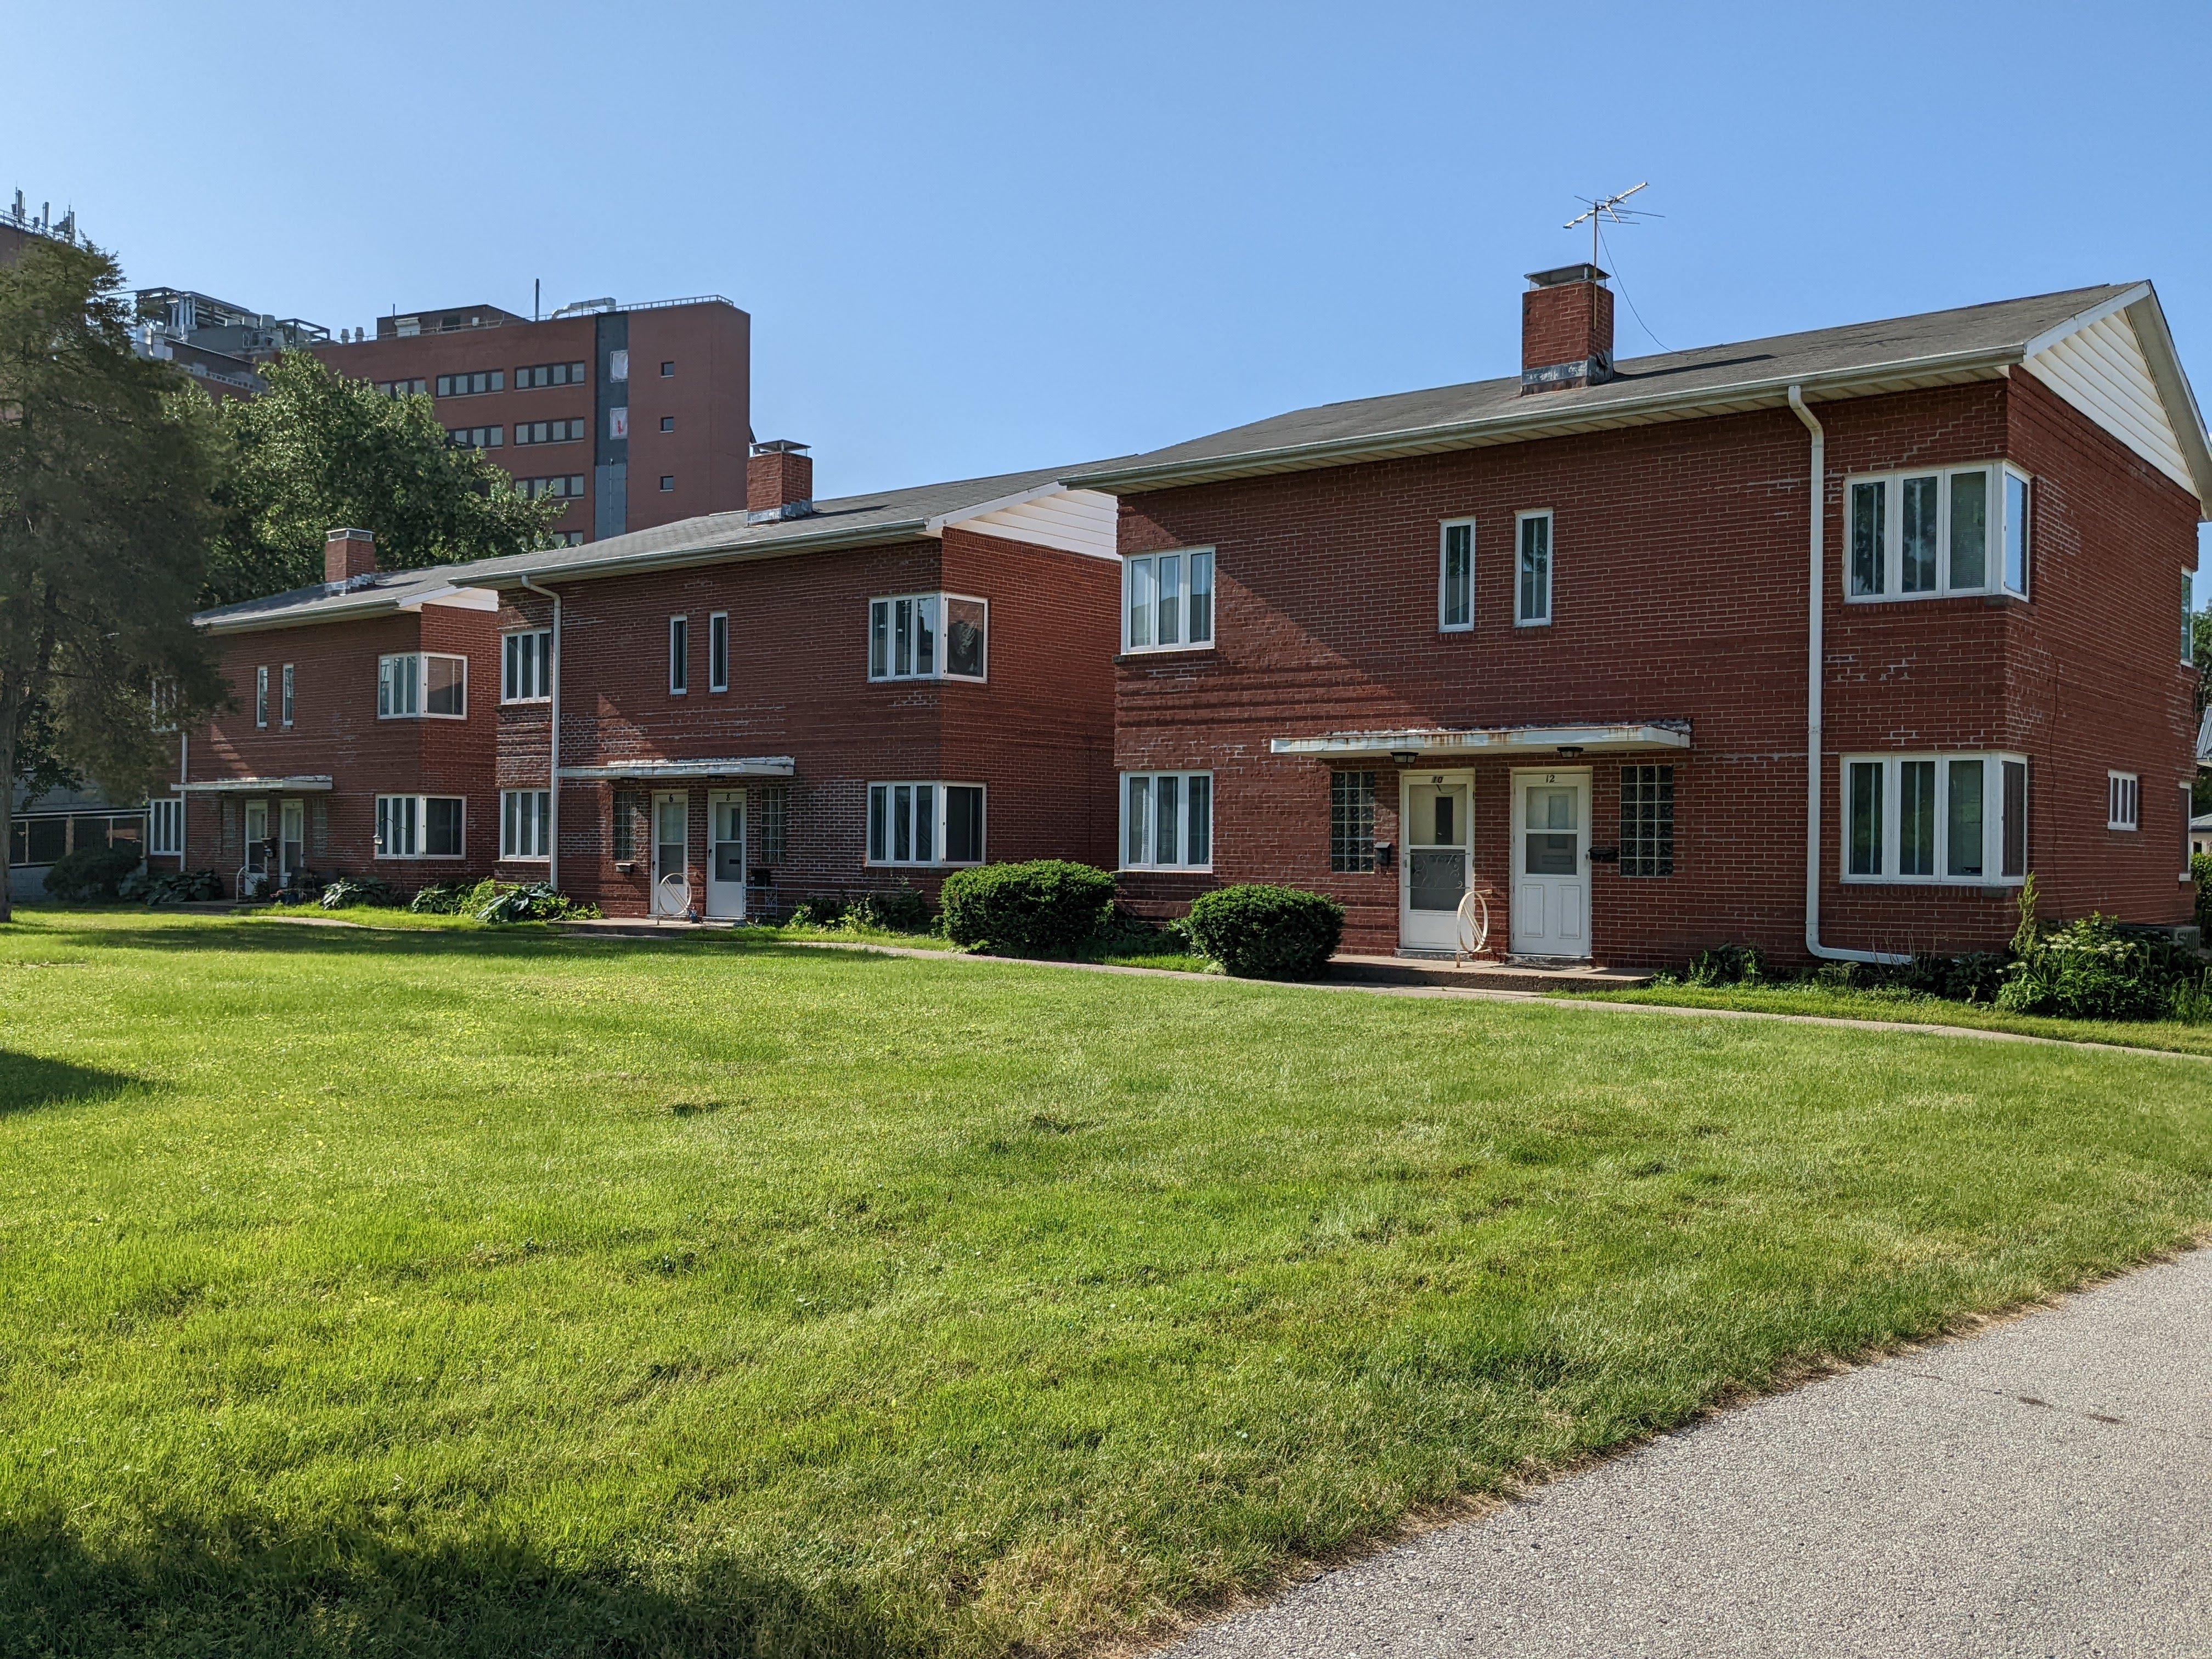 Woolf Avenue Court Apartments